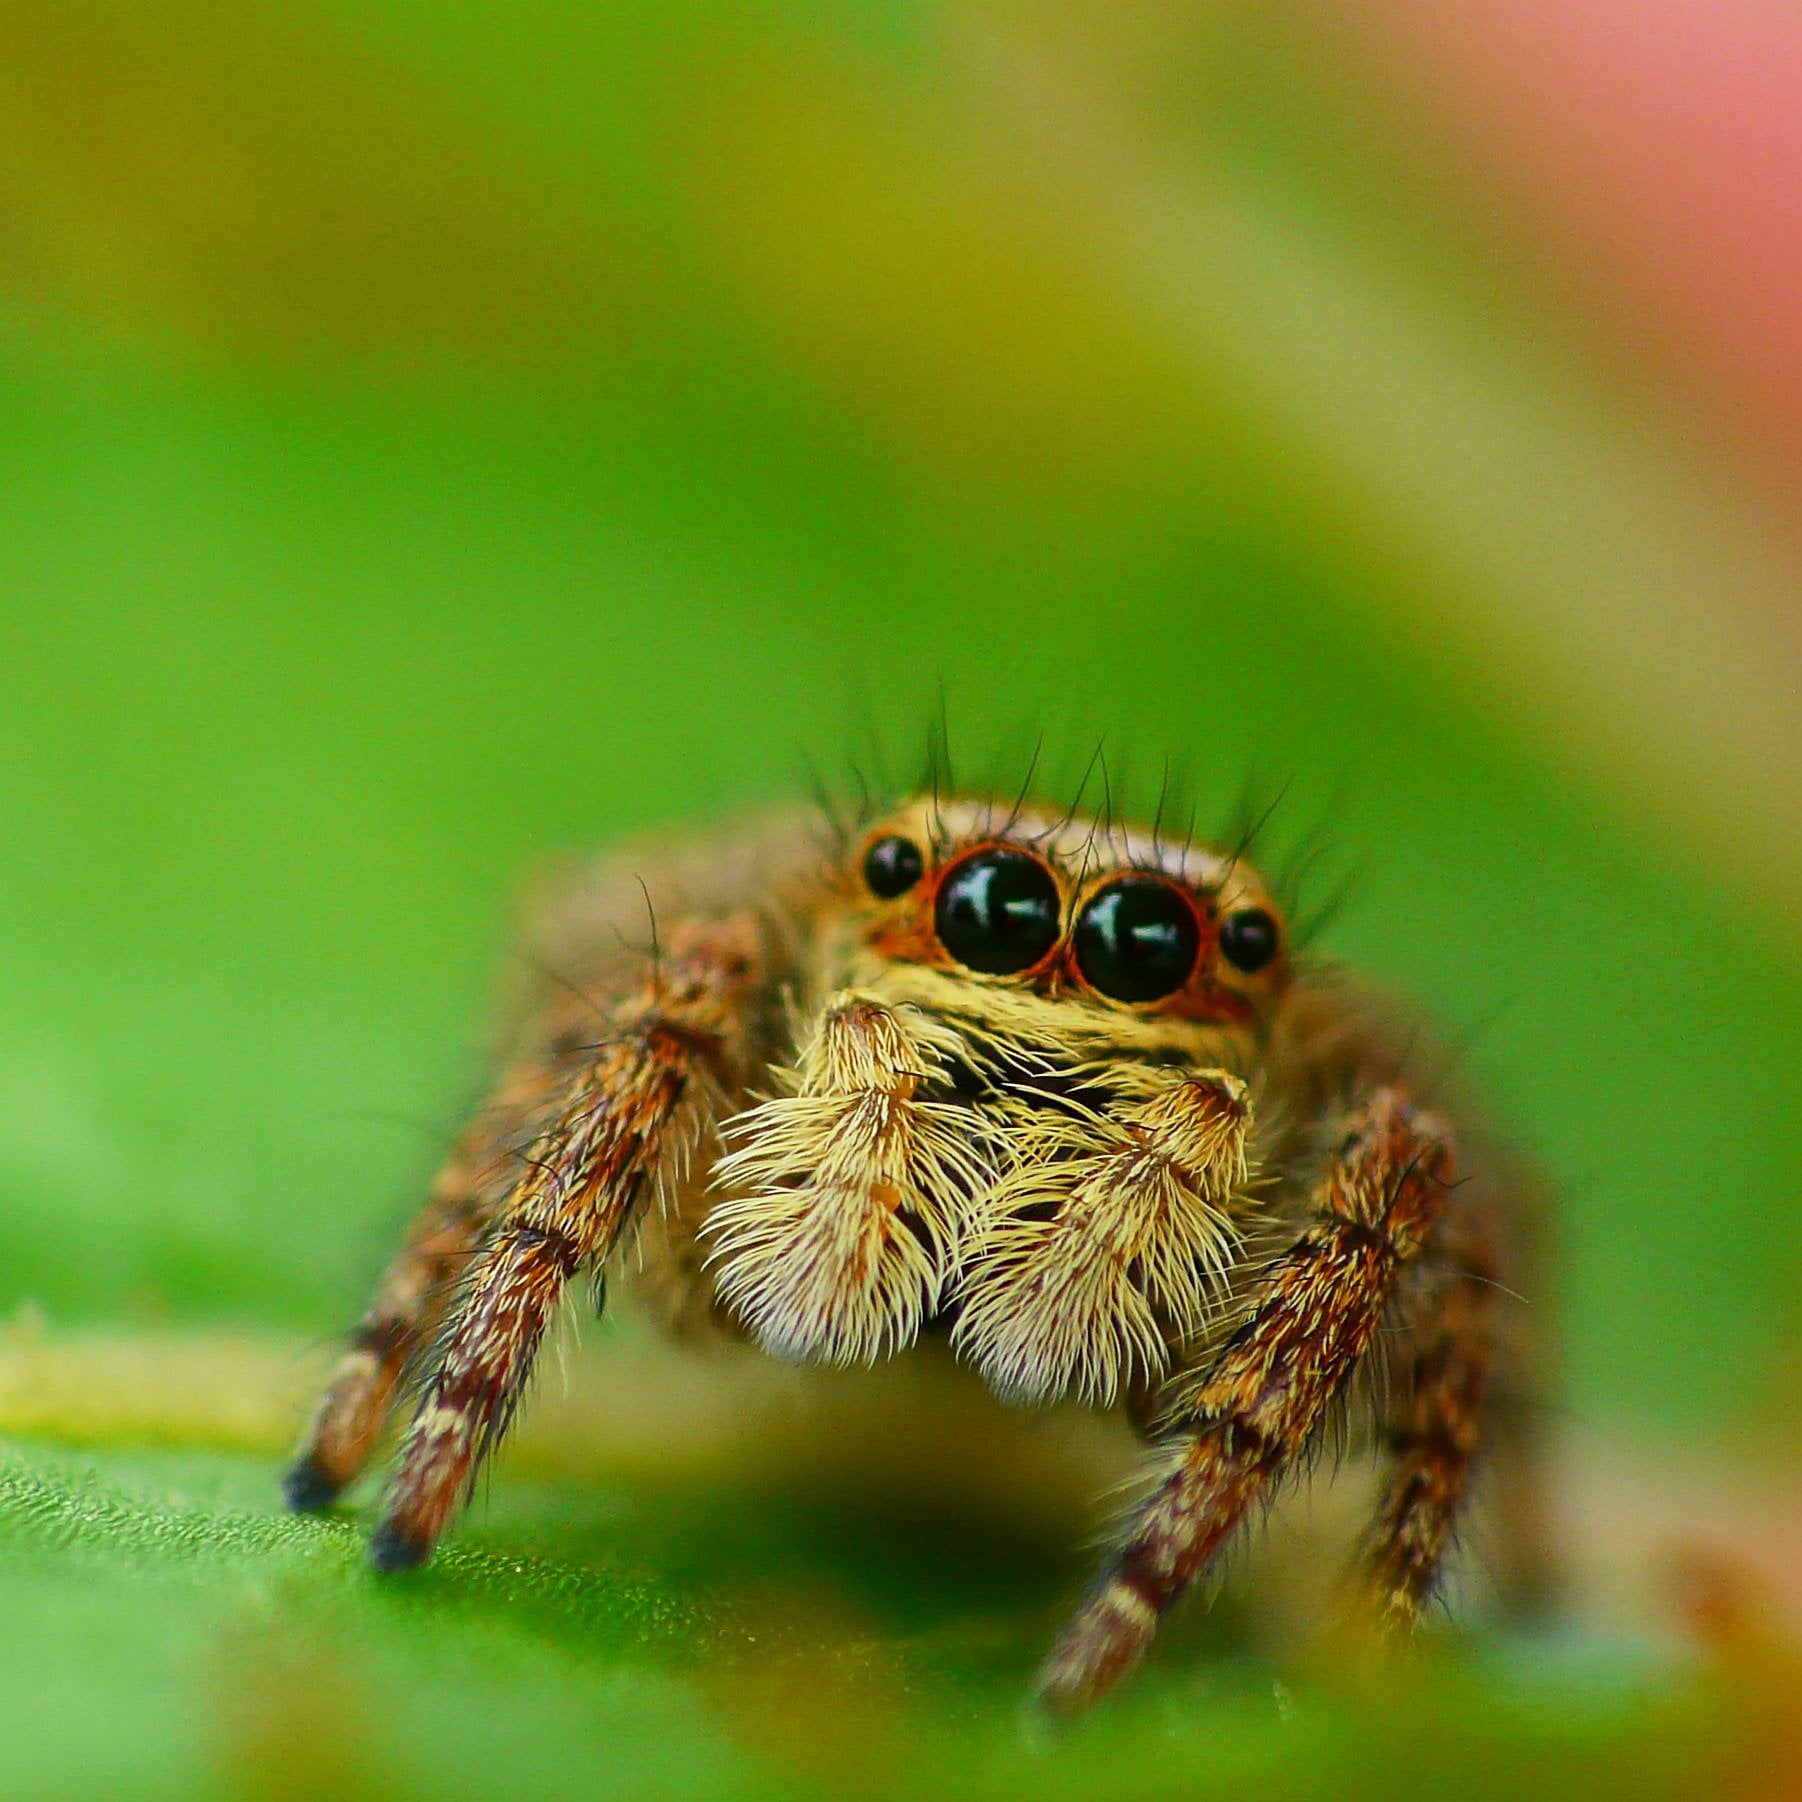 brown spider in closeup photo, jumping spider